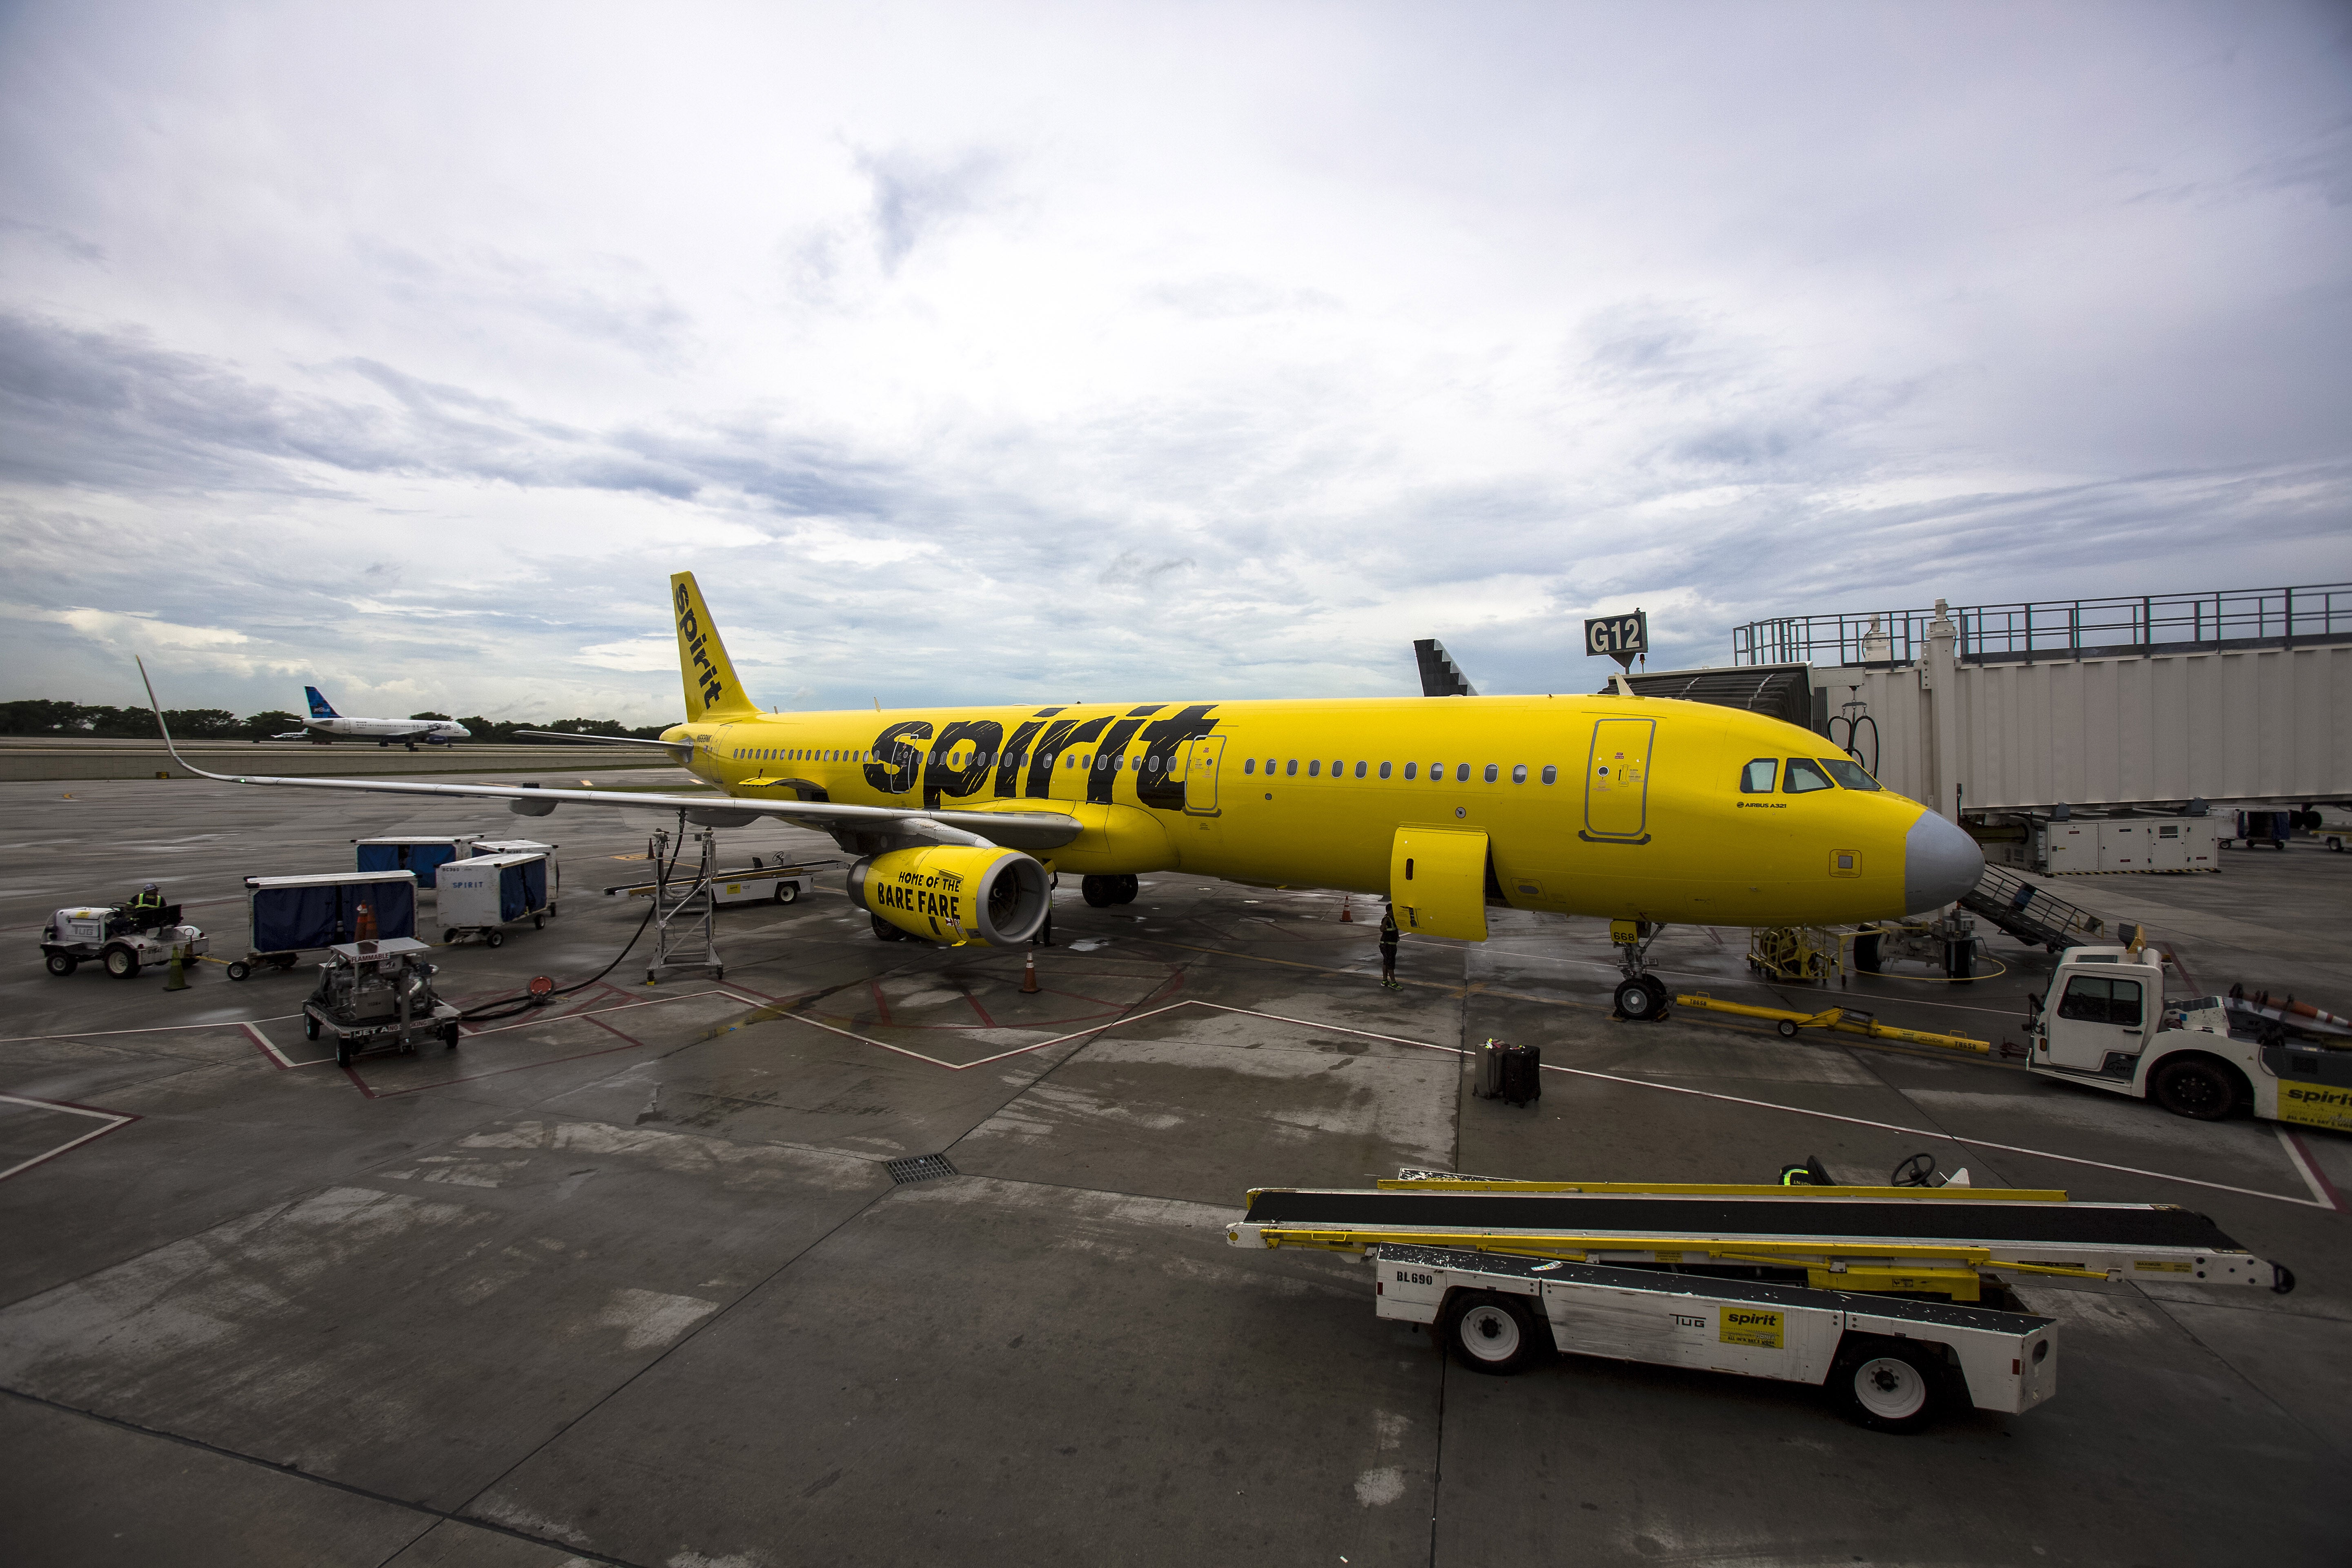 A Spirit Airlines Inc. plane sits on the tarmac at Fort Lauderdale International Airport (FLL) in Fort Lauderdale, Florida, U.S., on Friday, June 2, 2017. Revenue generated from the U.S. accounts for nearly 90 percent of Spirit's revenue. Photographer: Saul Martinez/Bloomberg via Getty Images